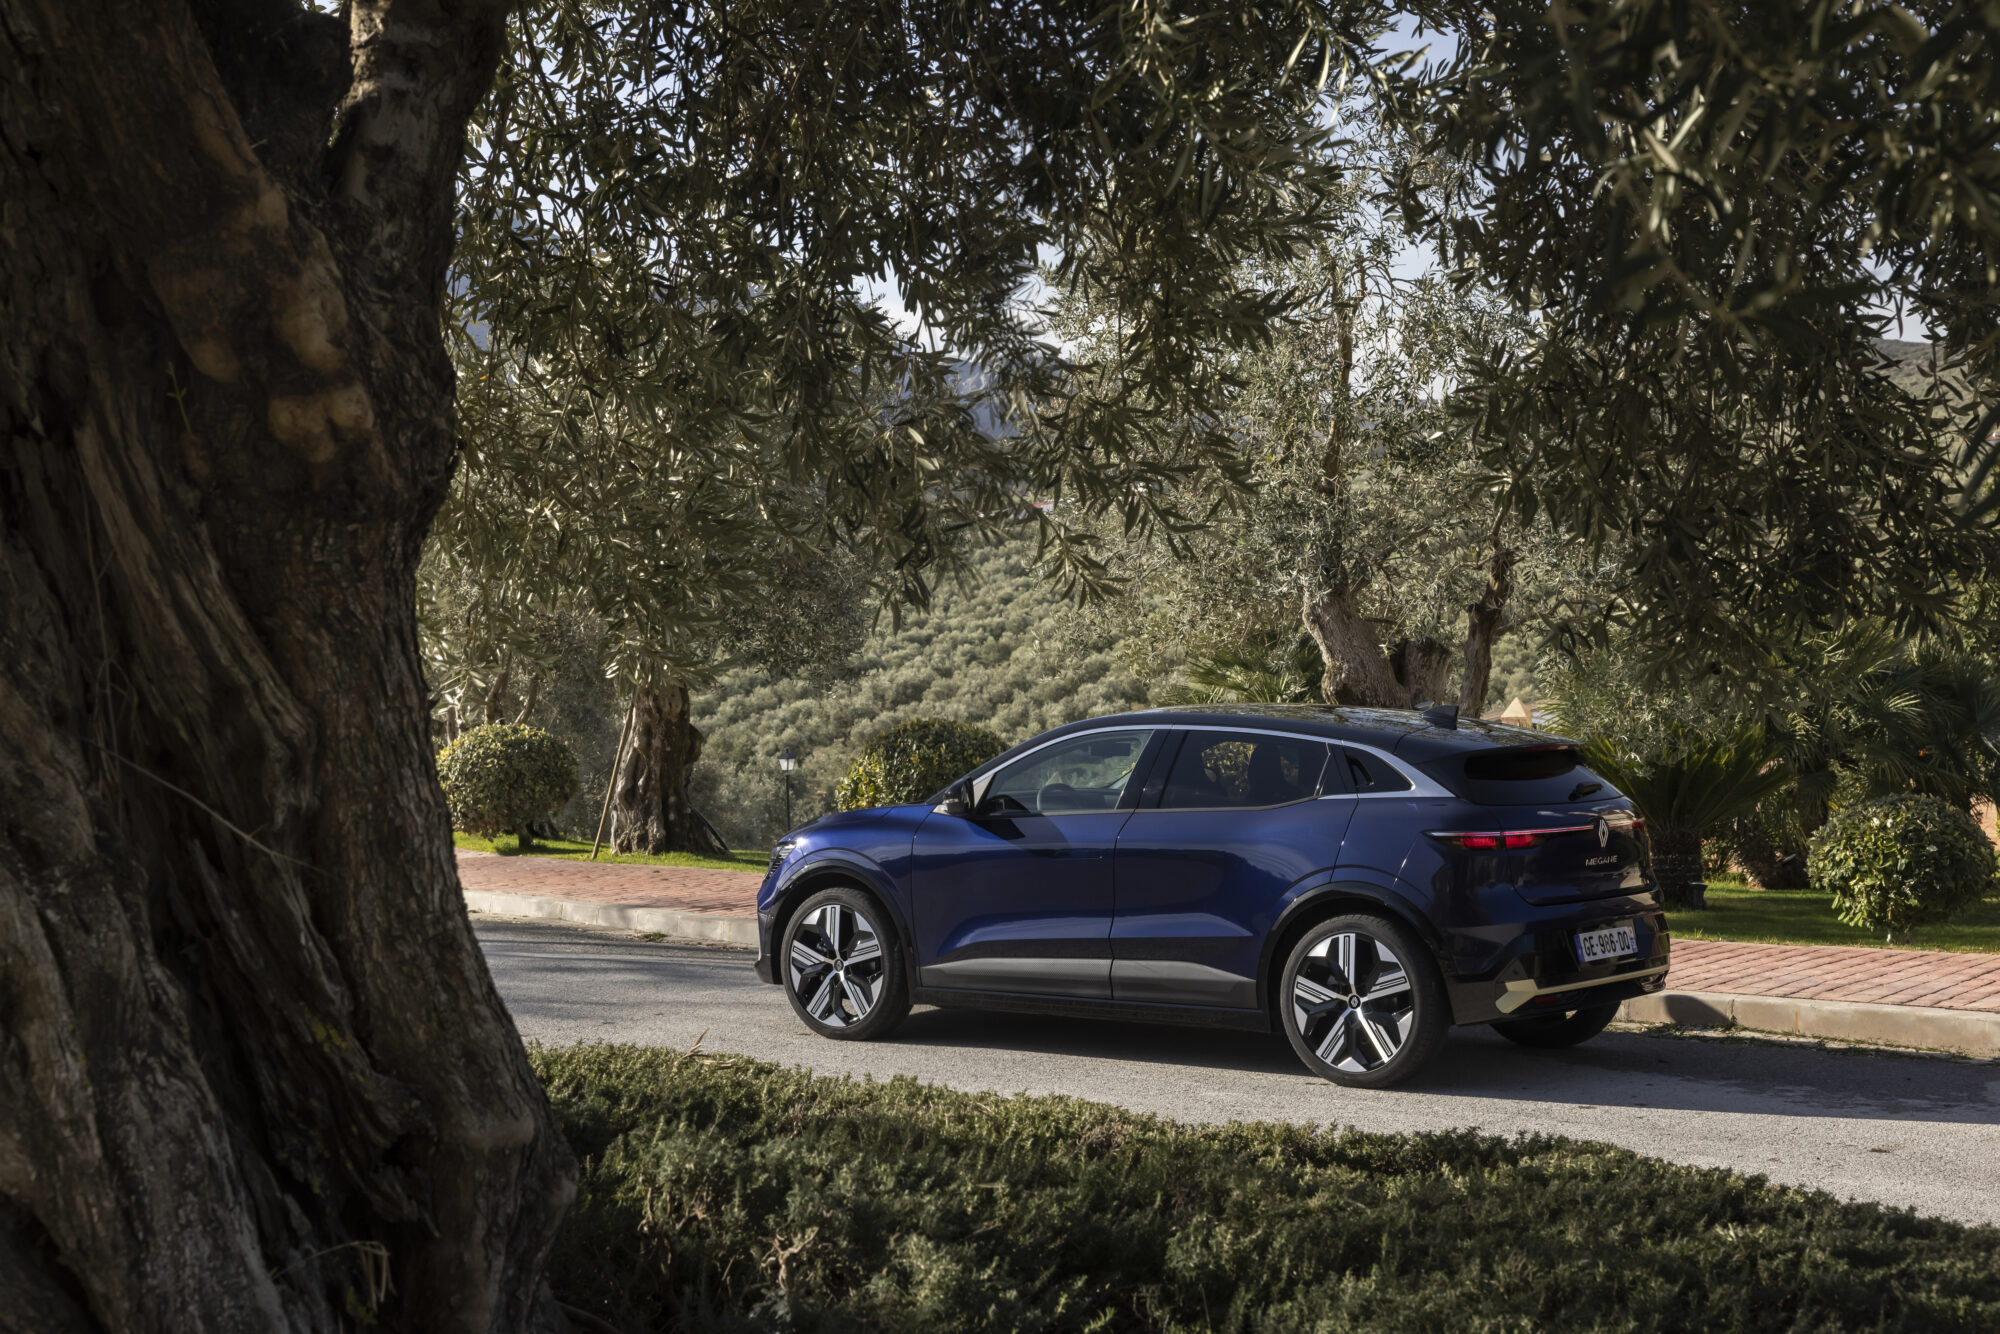 All-New Renault MEGANE E-TECH Electric - Iconic Version - Midnight Blue - Drive tests